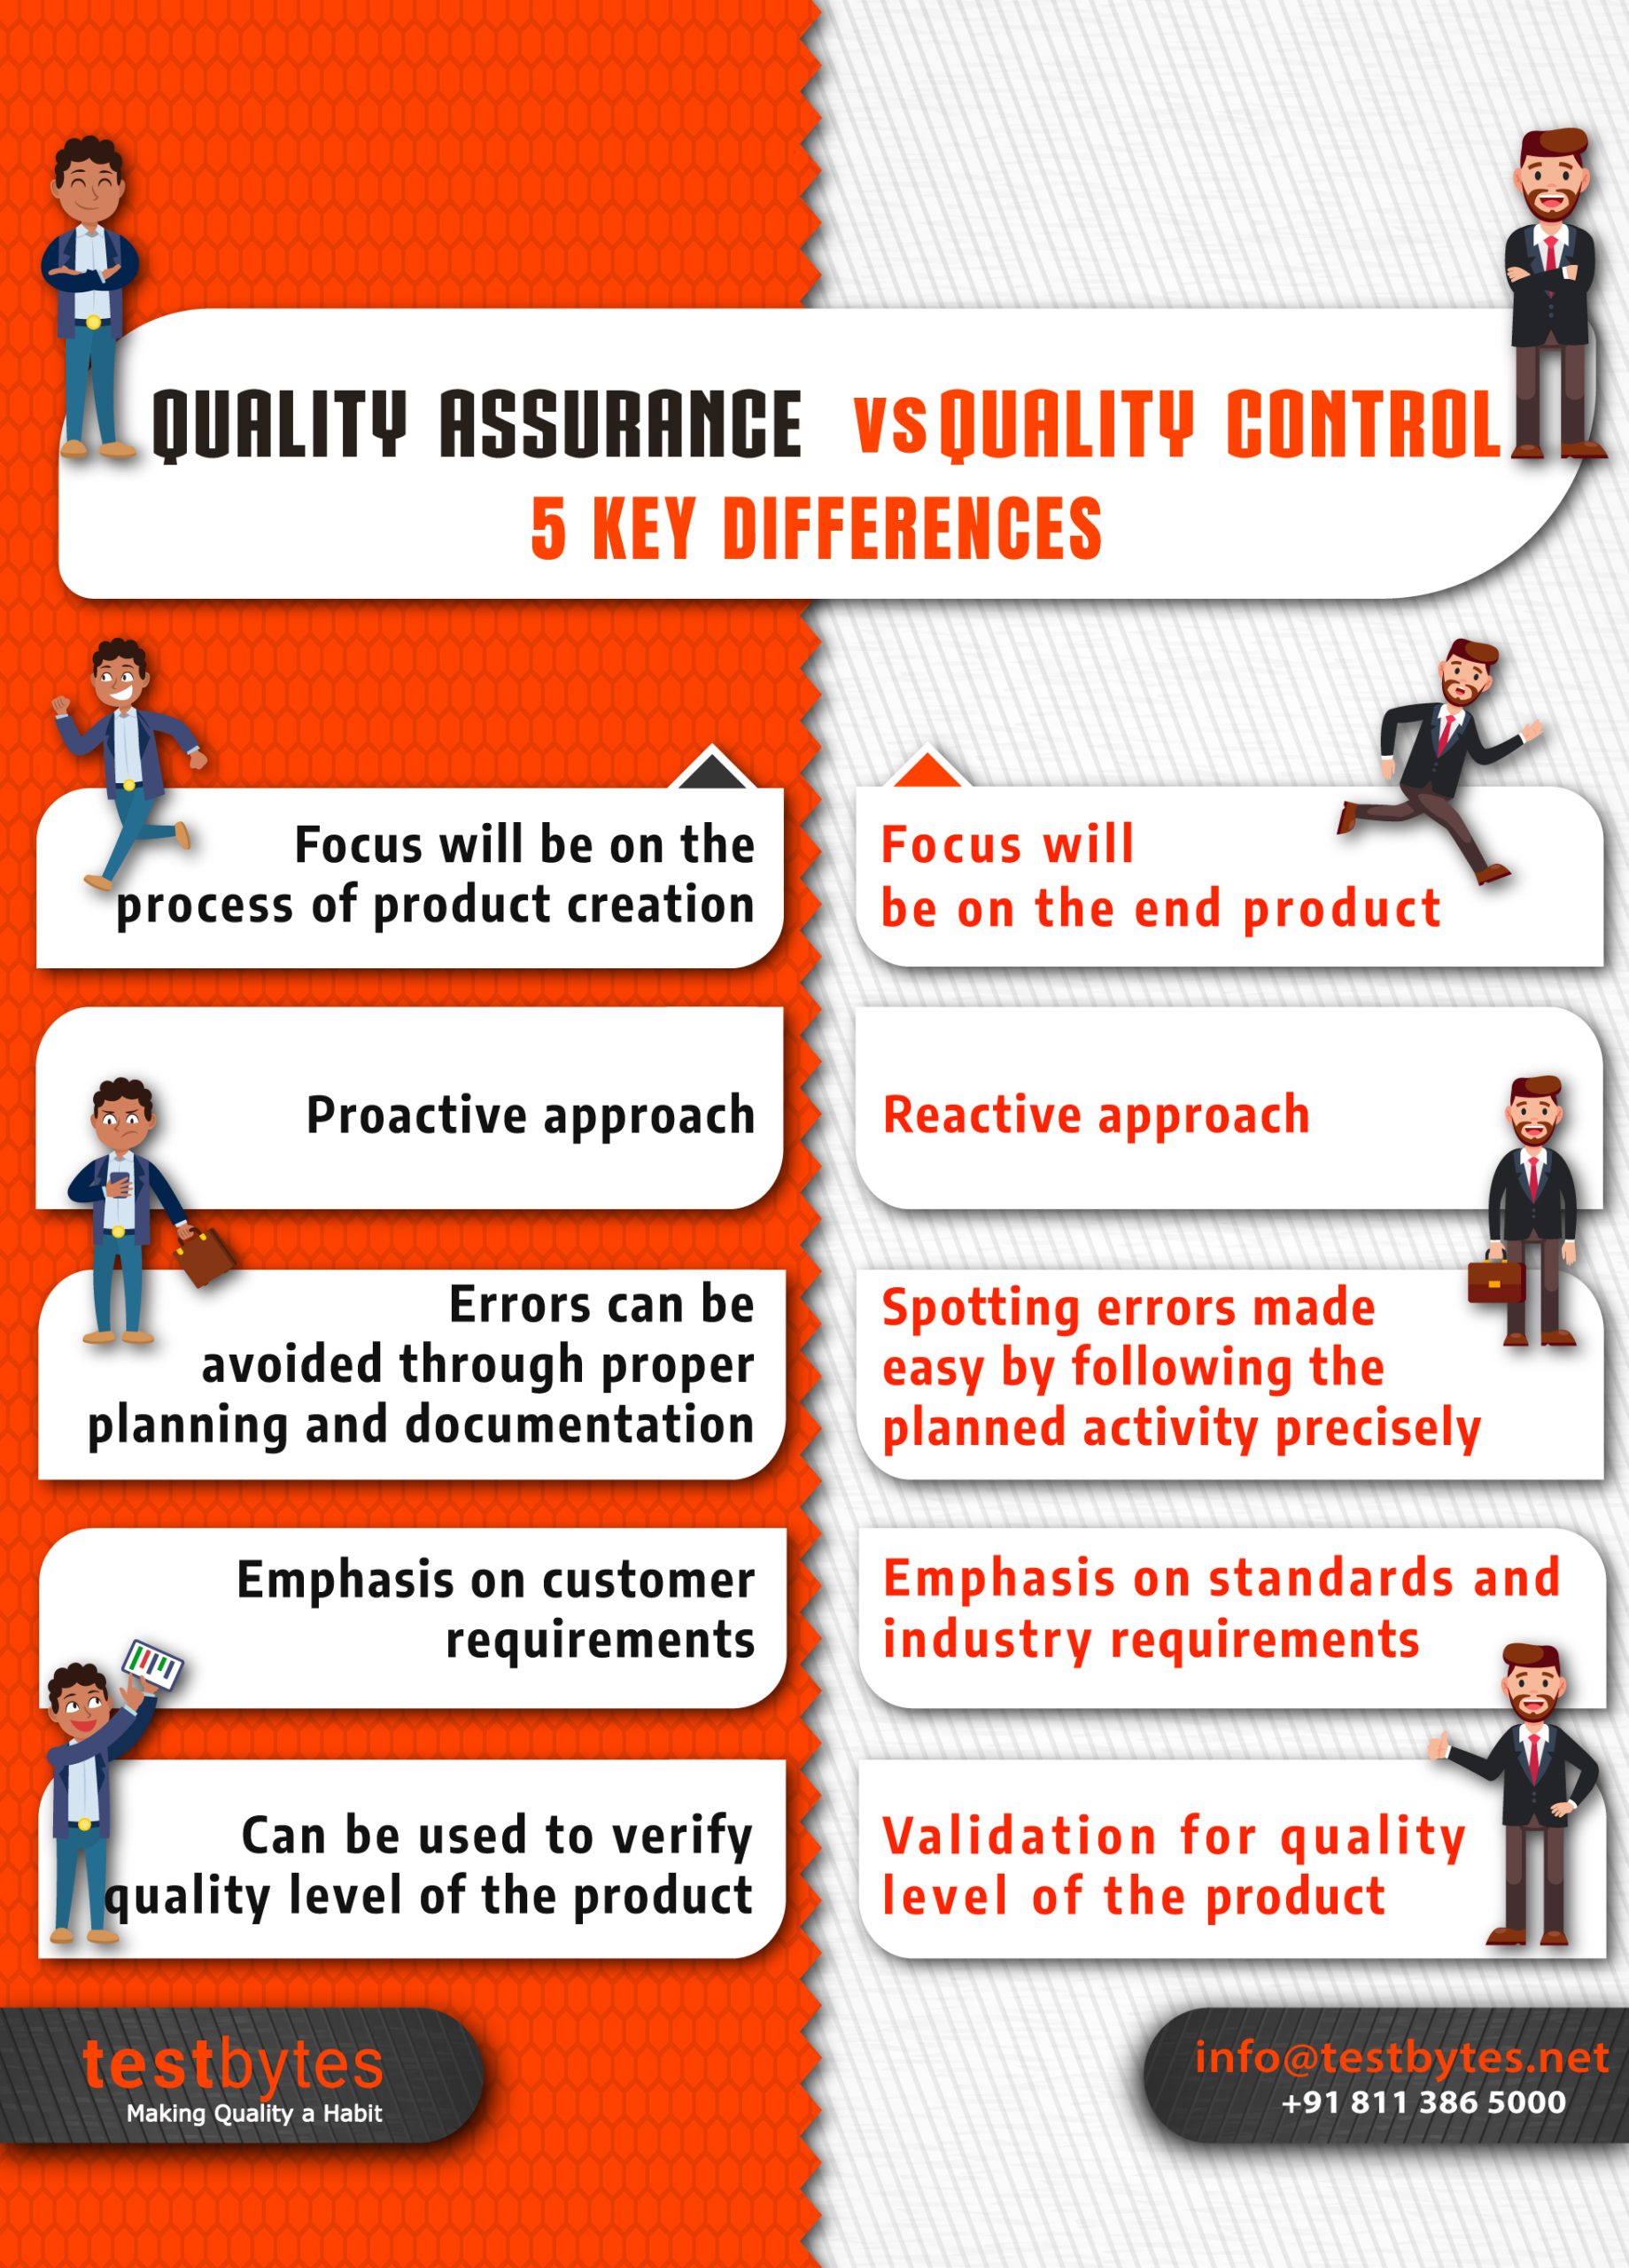 Quality Assurance vs Quality Control- 5 Key Differences